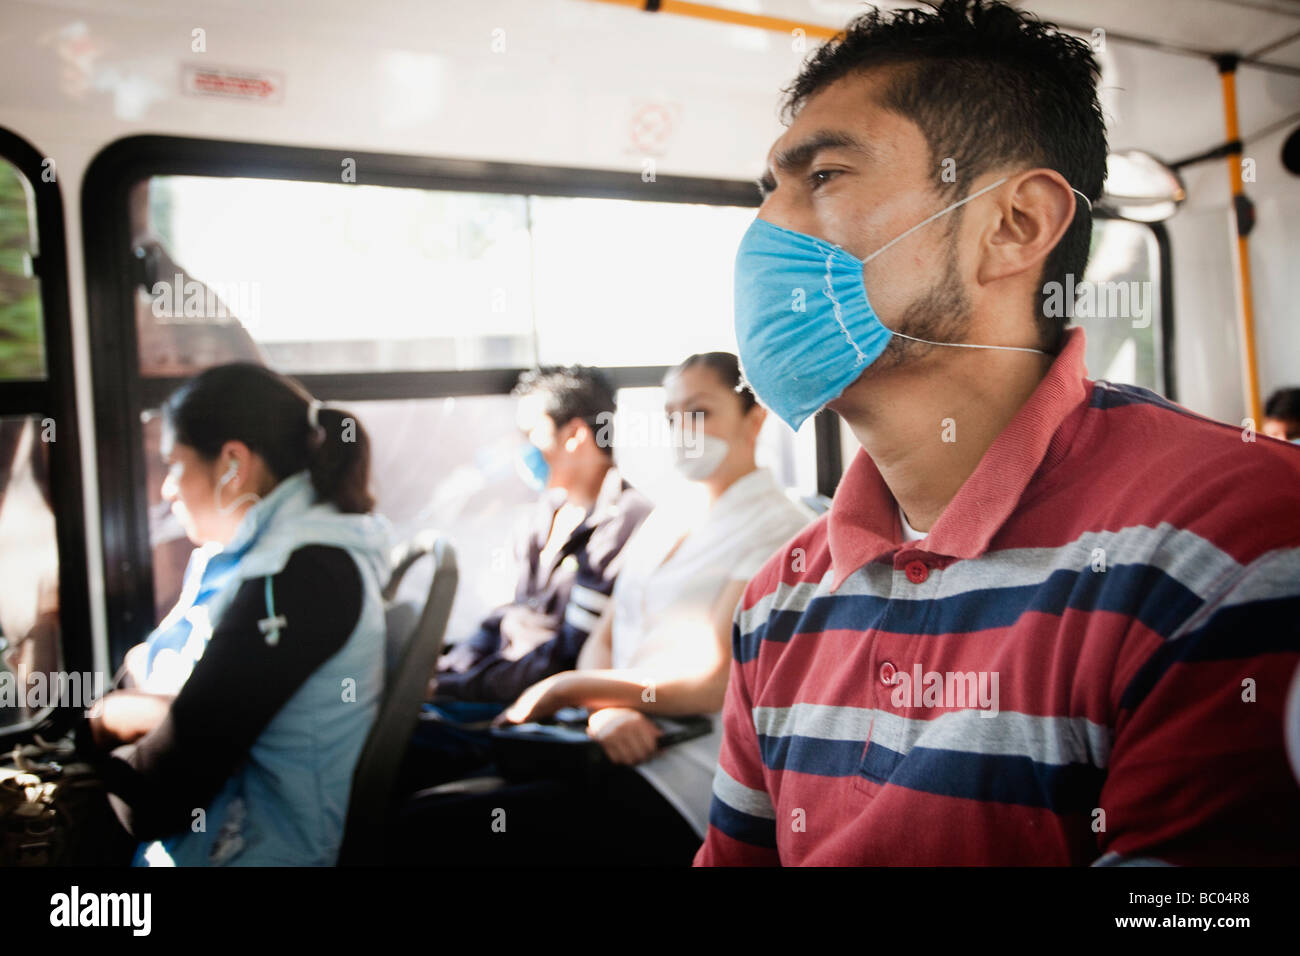 A man inside a bus wearing a mask during the swine flu epidemic in Mexico City, DF, Mexico. Stock Photo